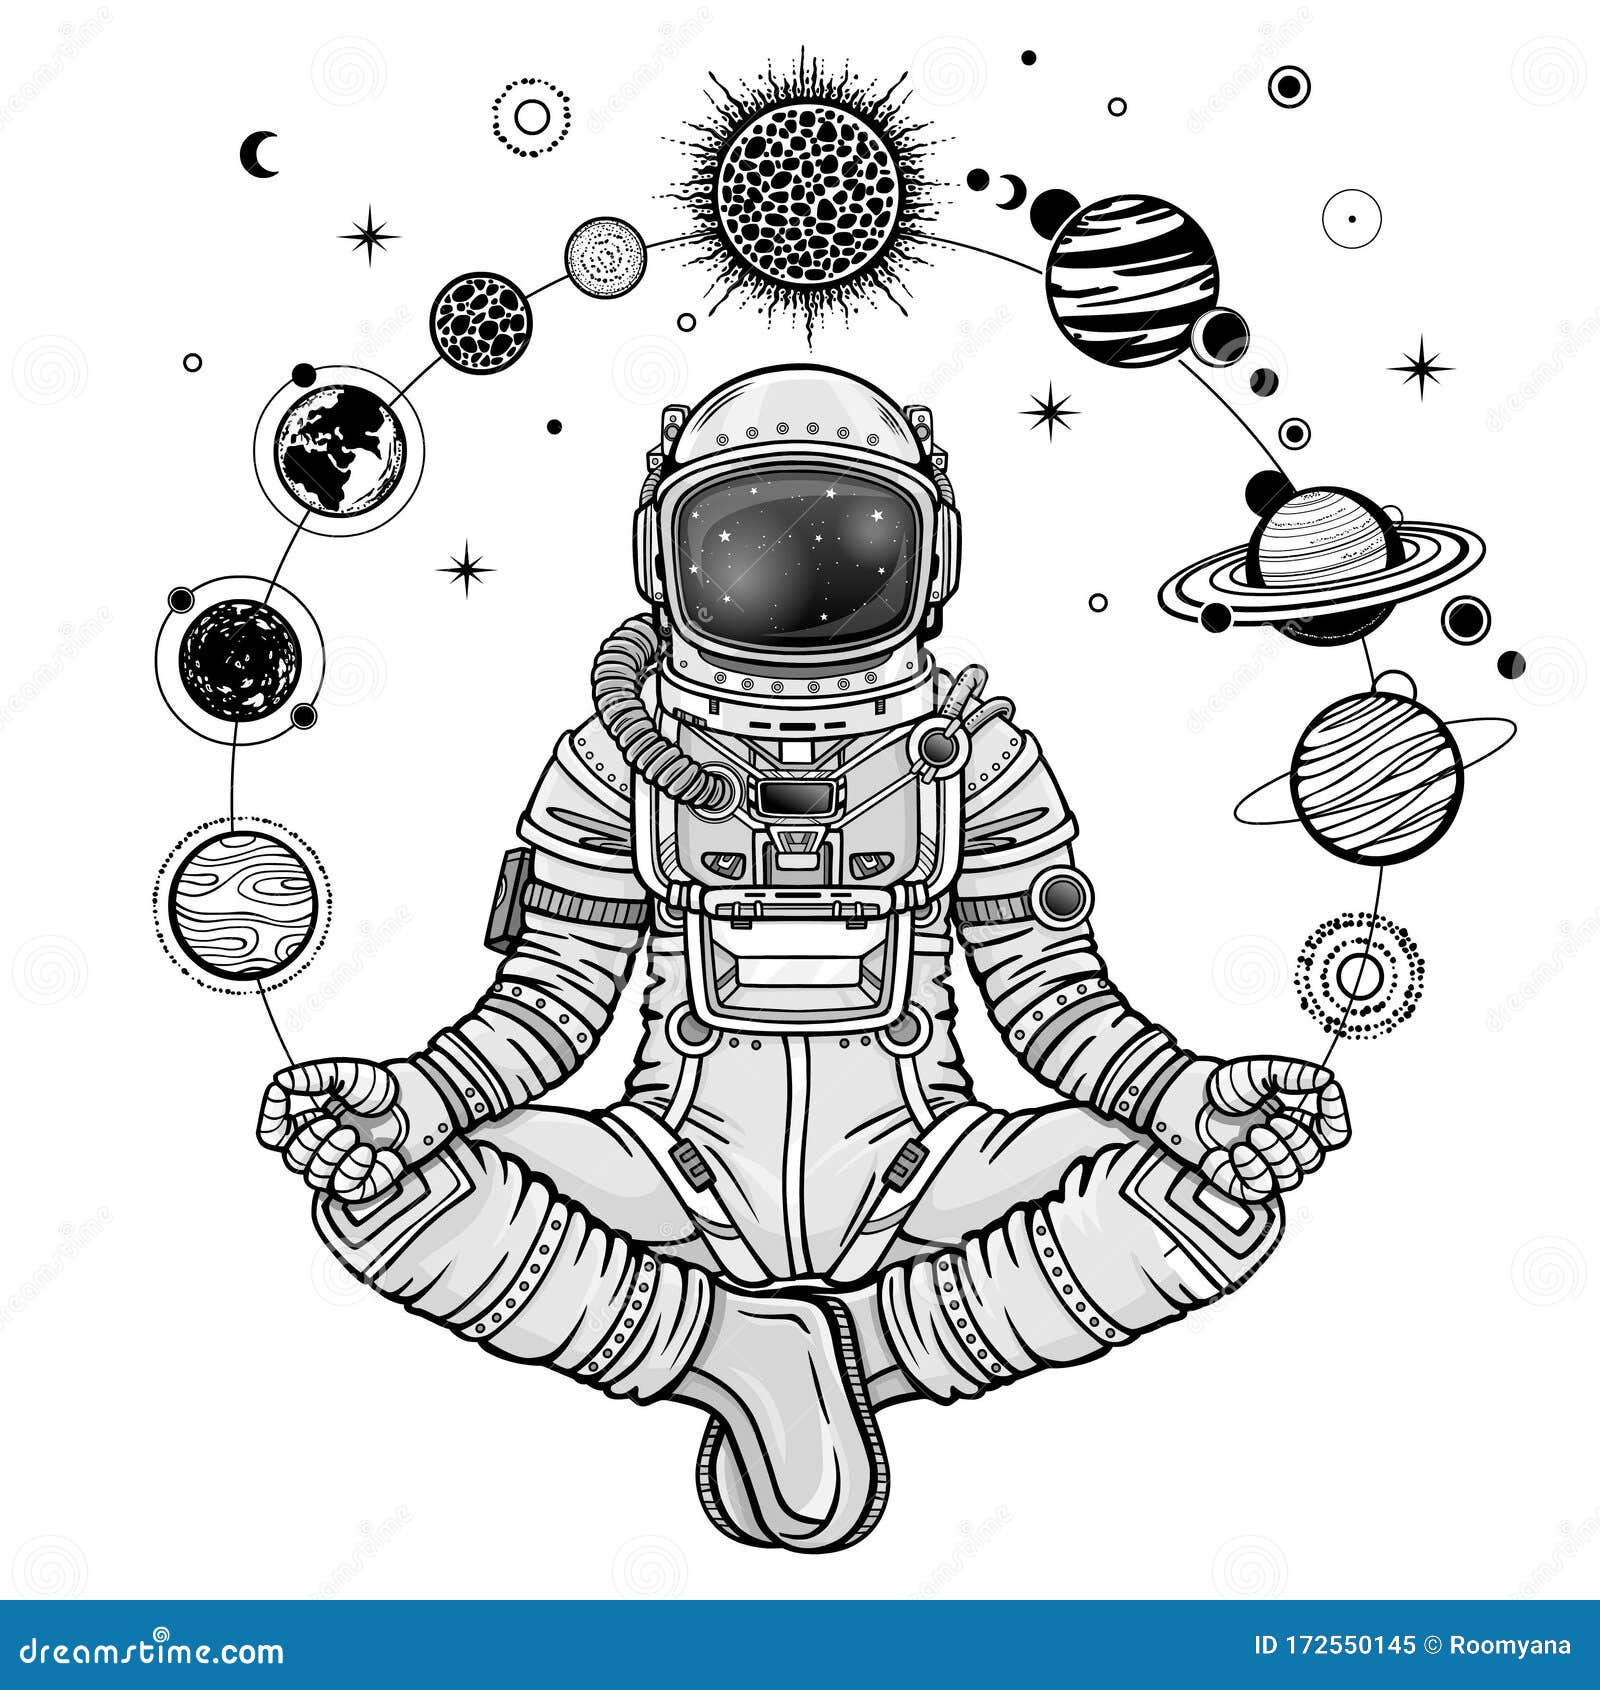 How To Draw Space Step By Step 🚀🪐 Space Drawing EASY - YouTube